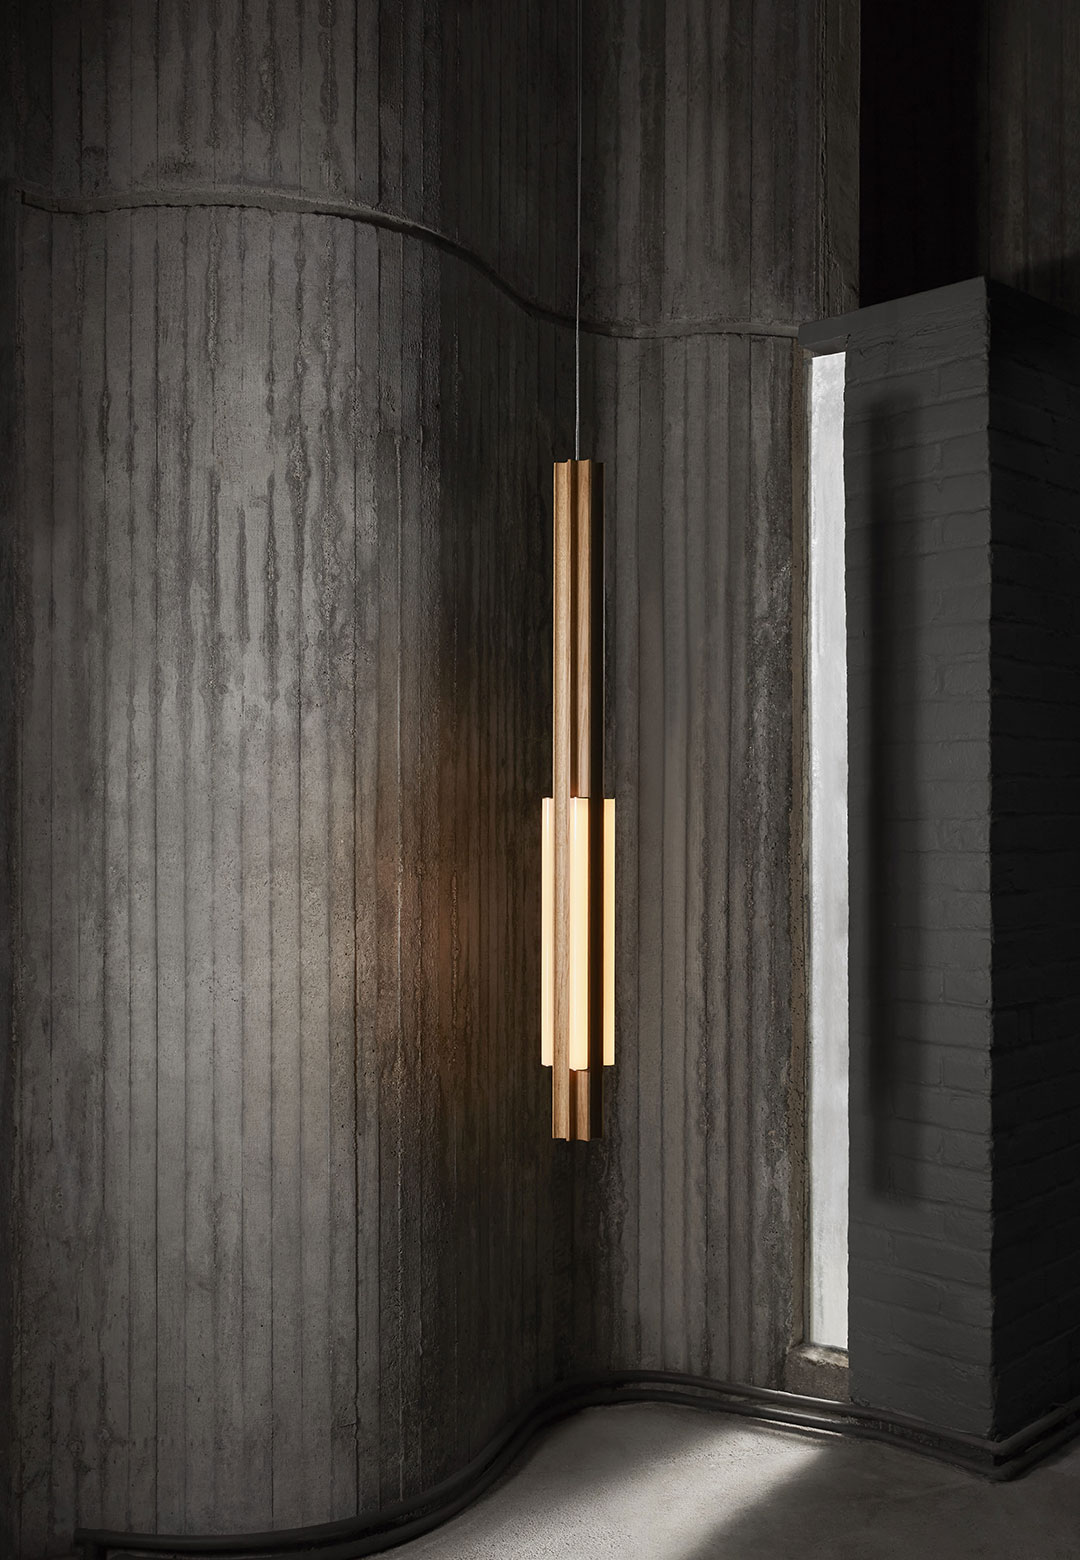 Lee Broom’s lighting collection all set to festoon the Shoreditch Design Triangle